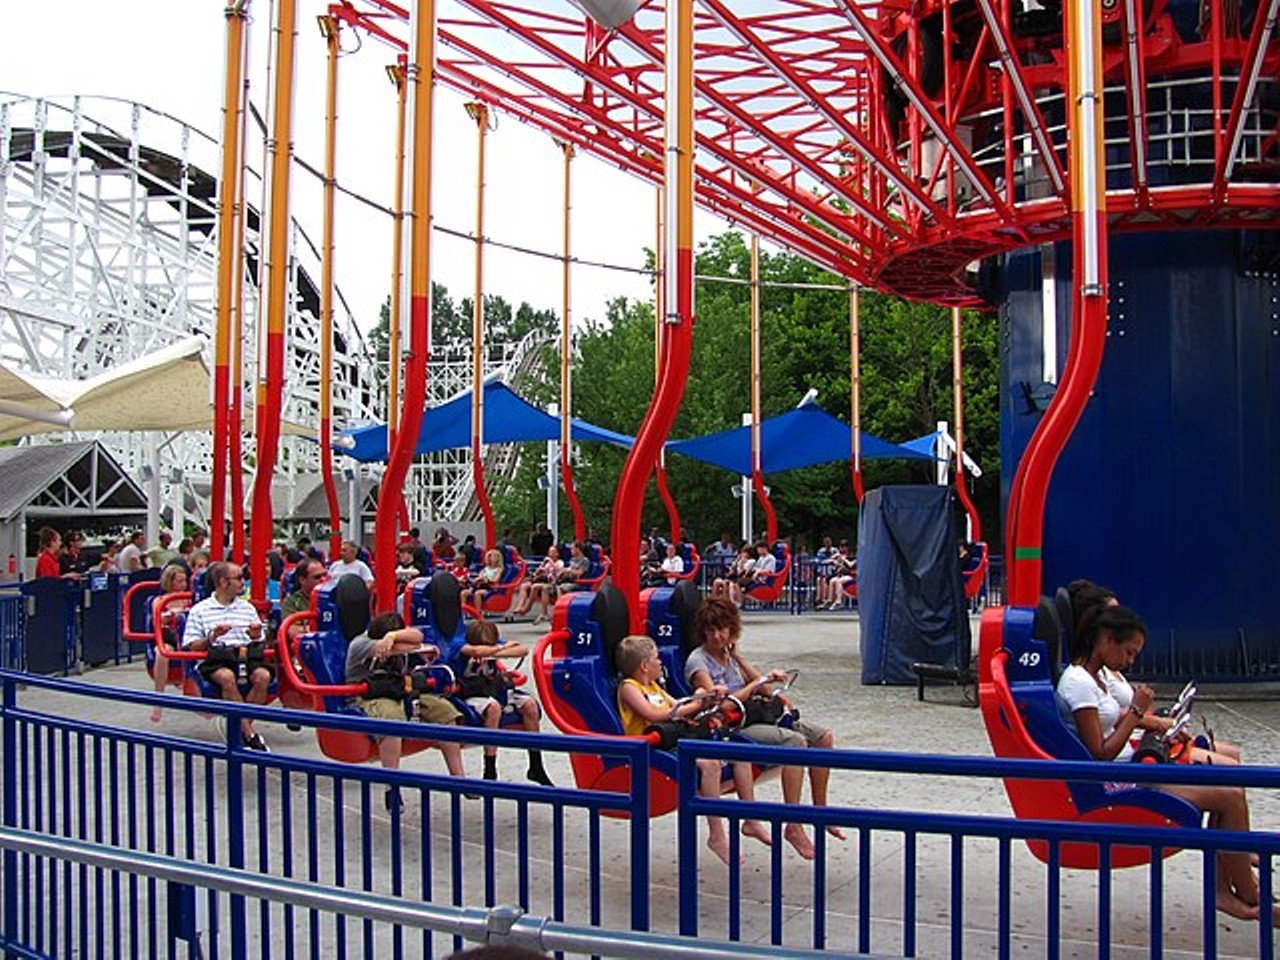 23. Windseeker
Poor capacity and reliability, as well as an inconvenient location are behind this attraction's ranking. Only good if you want views of the nearly abandoned SpongeBob 4D Theater or the former Vortex site.